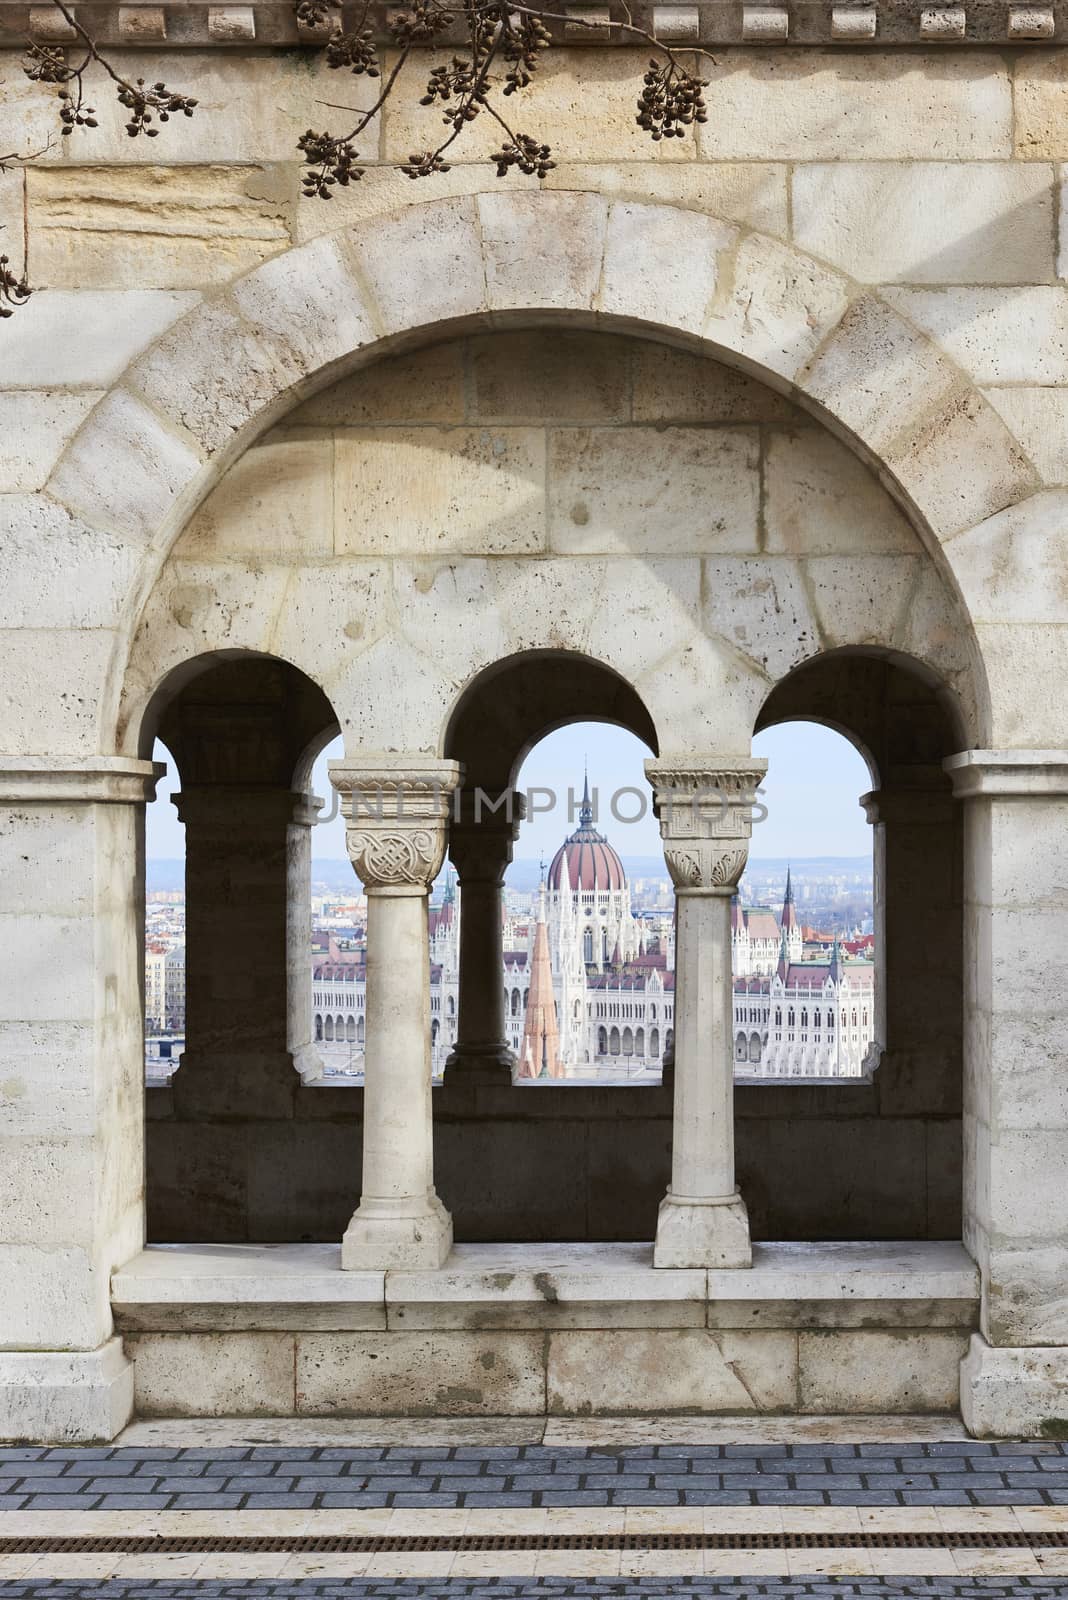 BUDAPEST, HUNGARY - FEBRUARY 02: Hungarian Parliament building seen from between Fisherman's Bastion's arches, at the Old Town district. February 02, 2016 in Budapest.